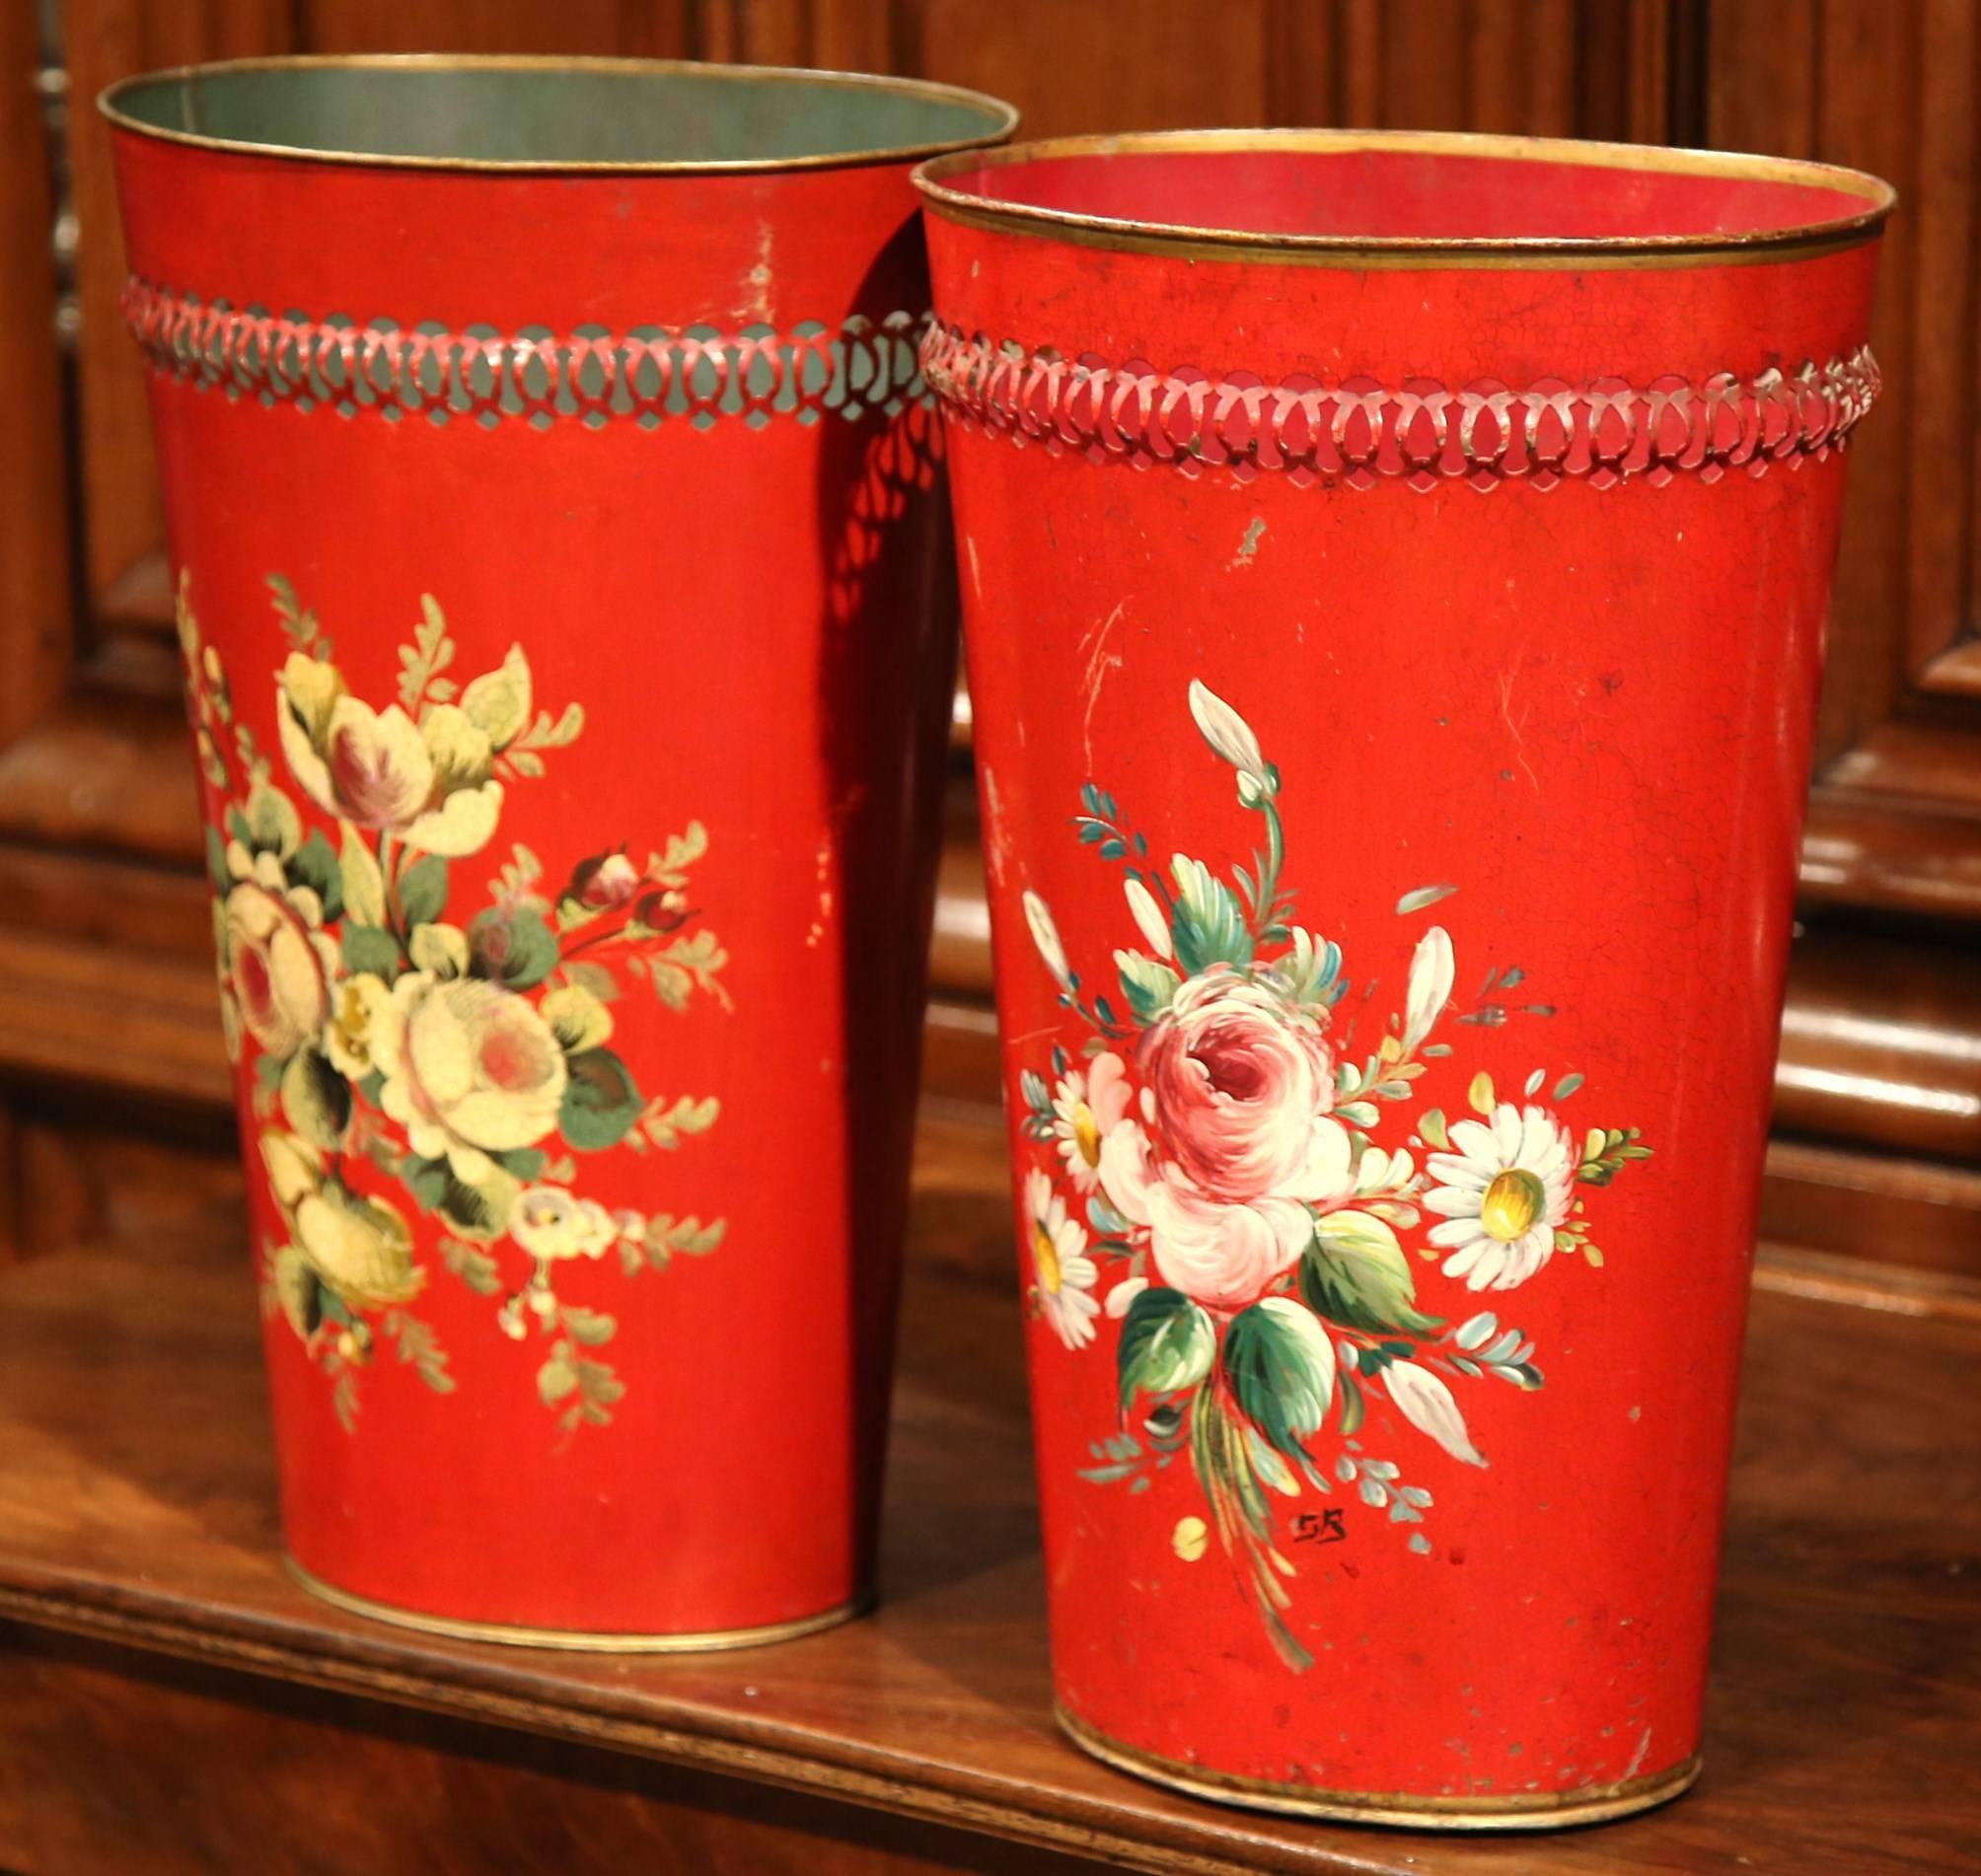 This fine pair of traditional, antique baskets were created in France, circa 1900. The red, decorative waste baskets are hand-painted with colorful flower bouquets with various designs. Each basked is in excellent condition and would make a